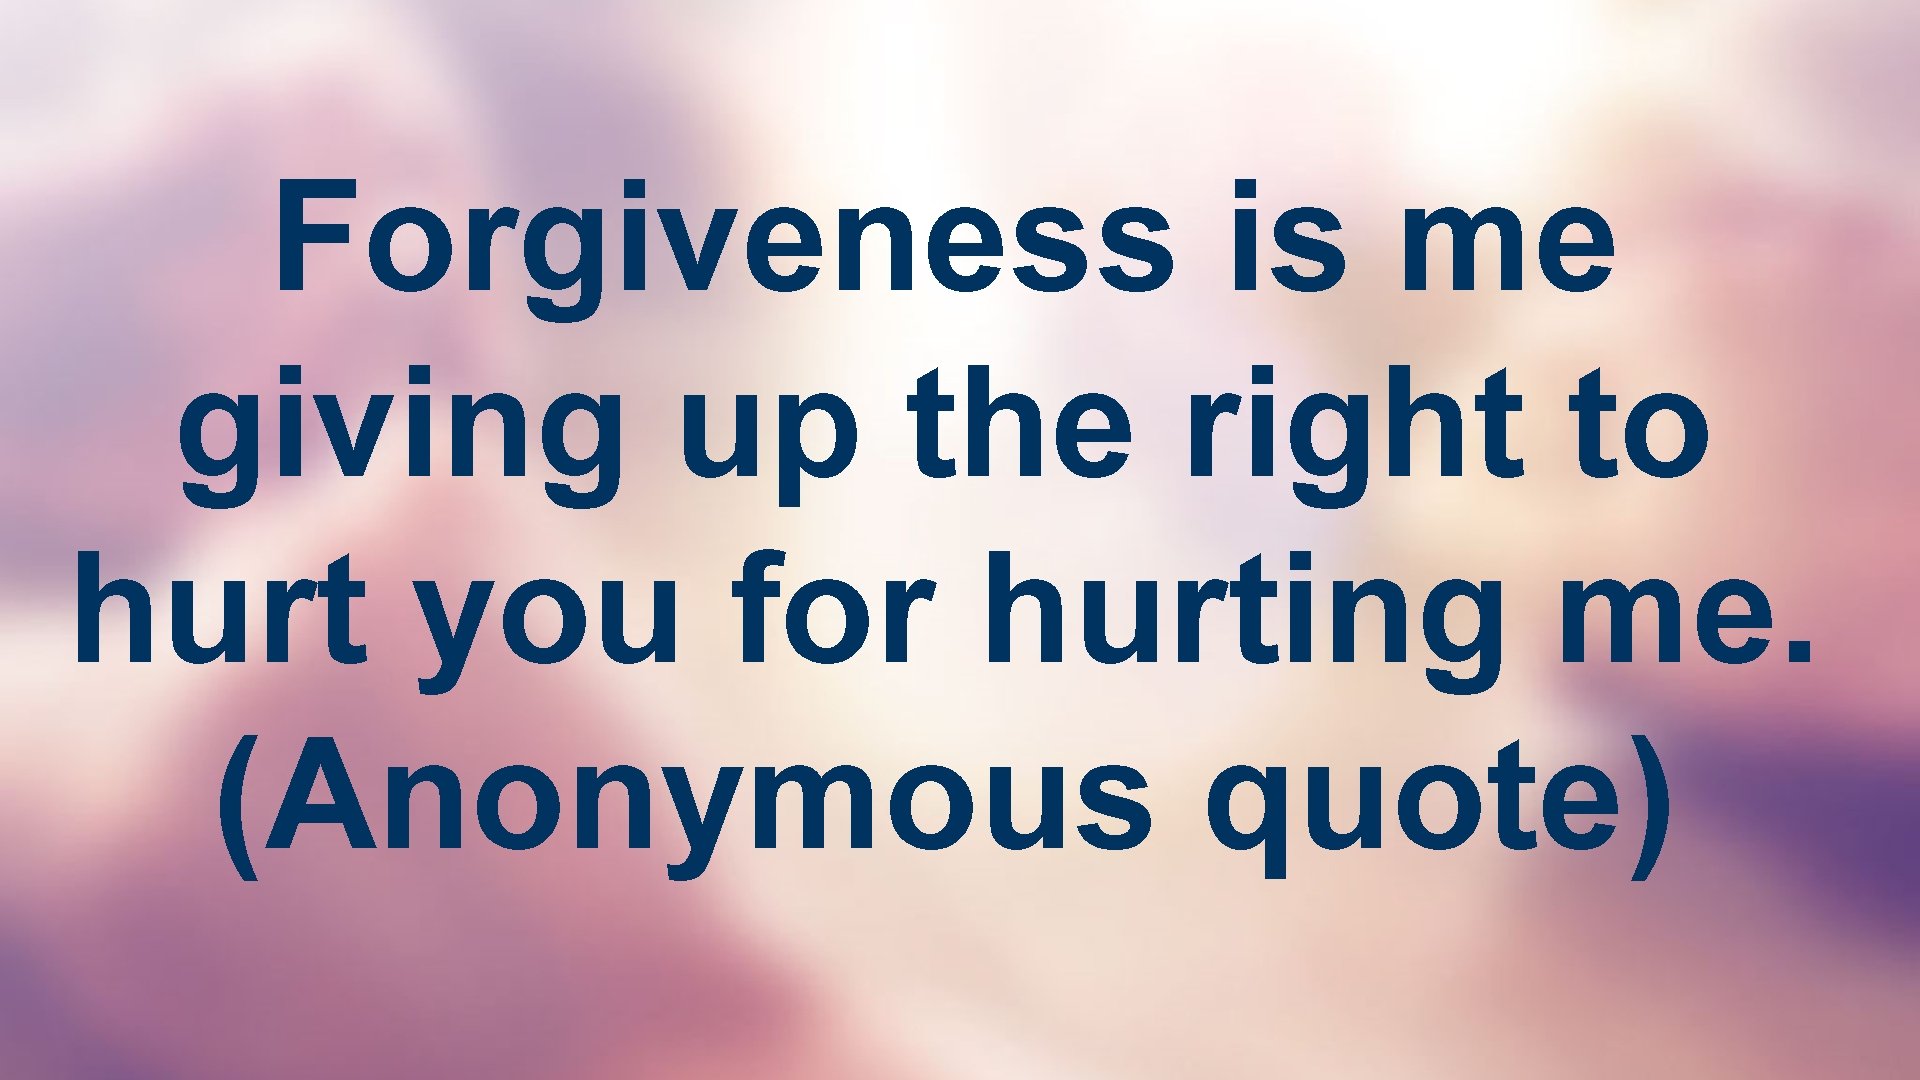 Forgiveness is me giving up the right to hurt you for hurting me. (Anonymous